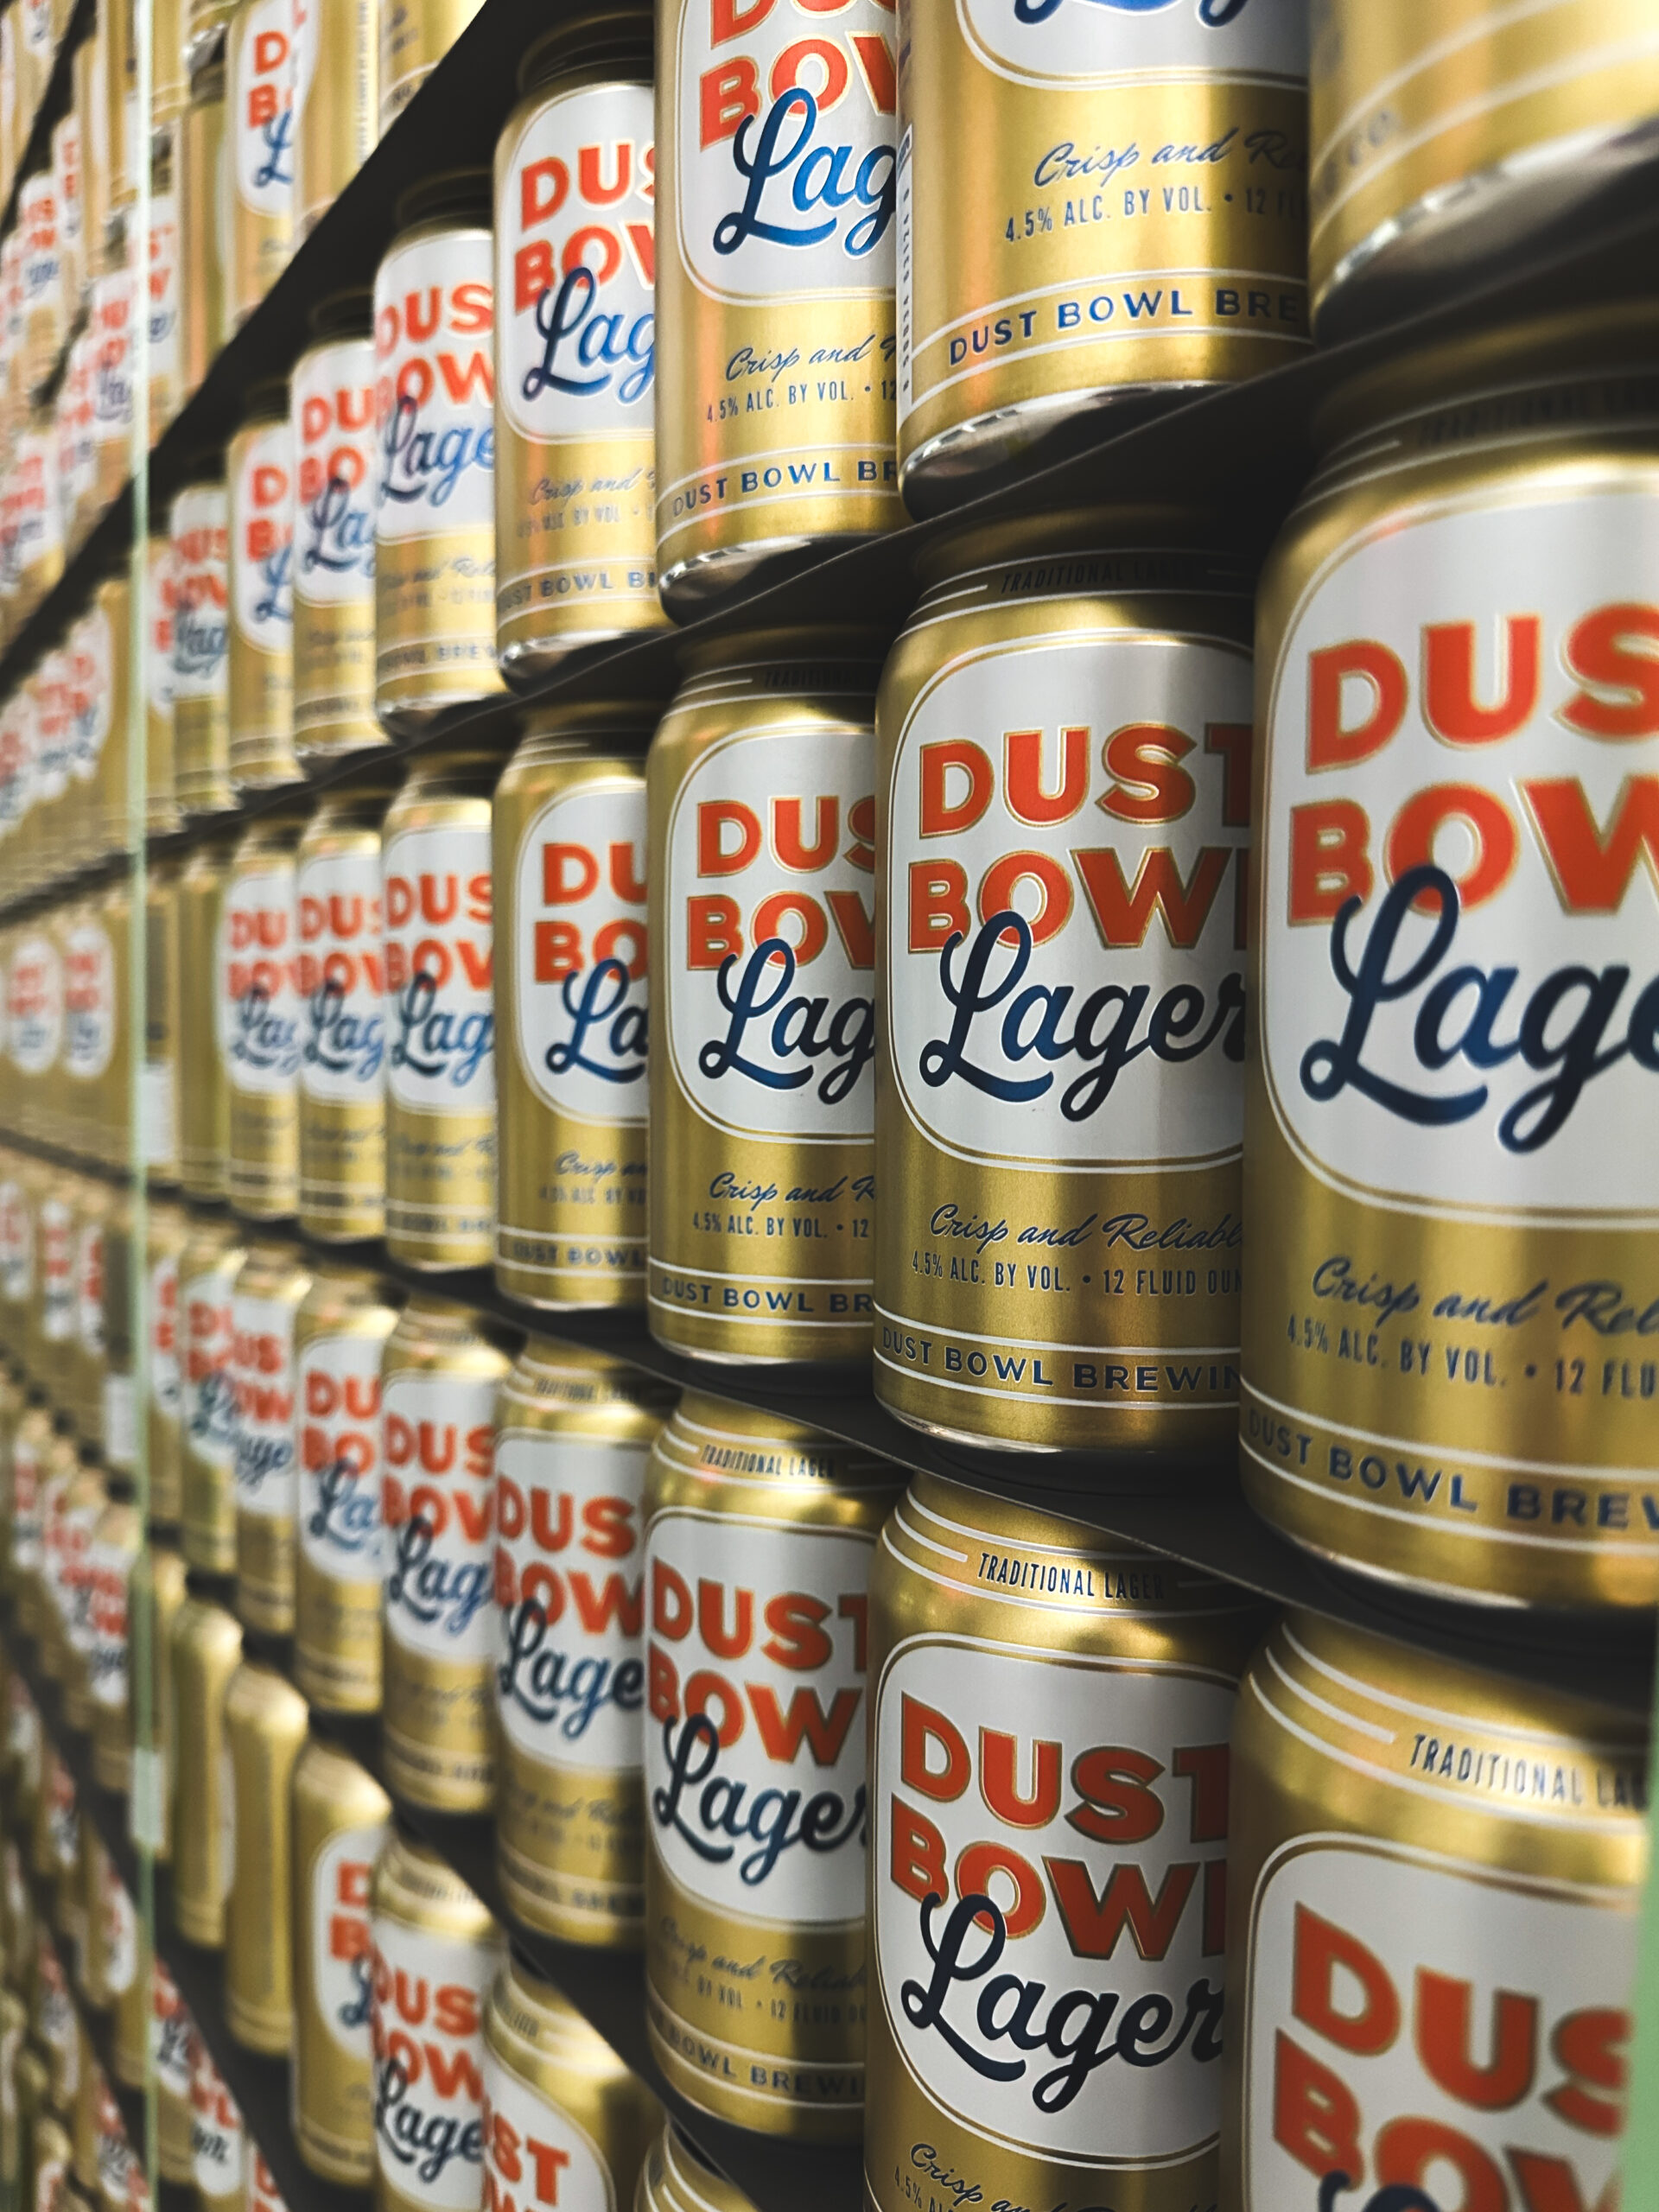 Lined up and stacked cans of Dust Bowl Lager